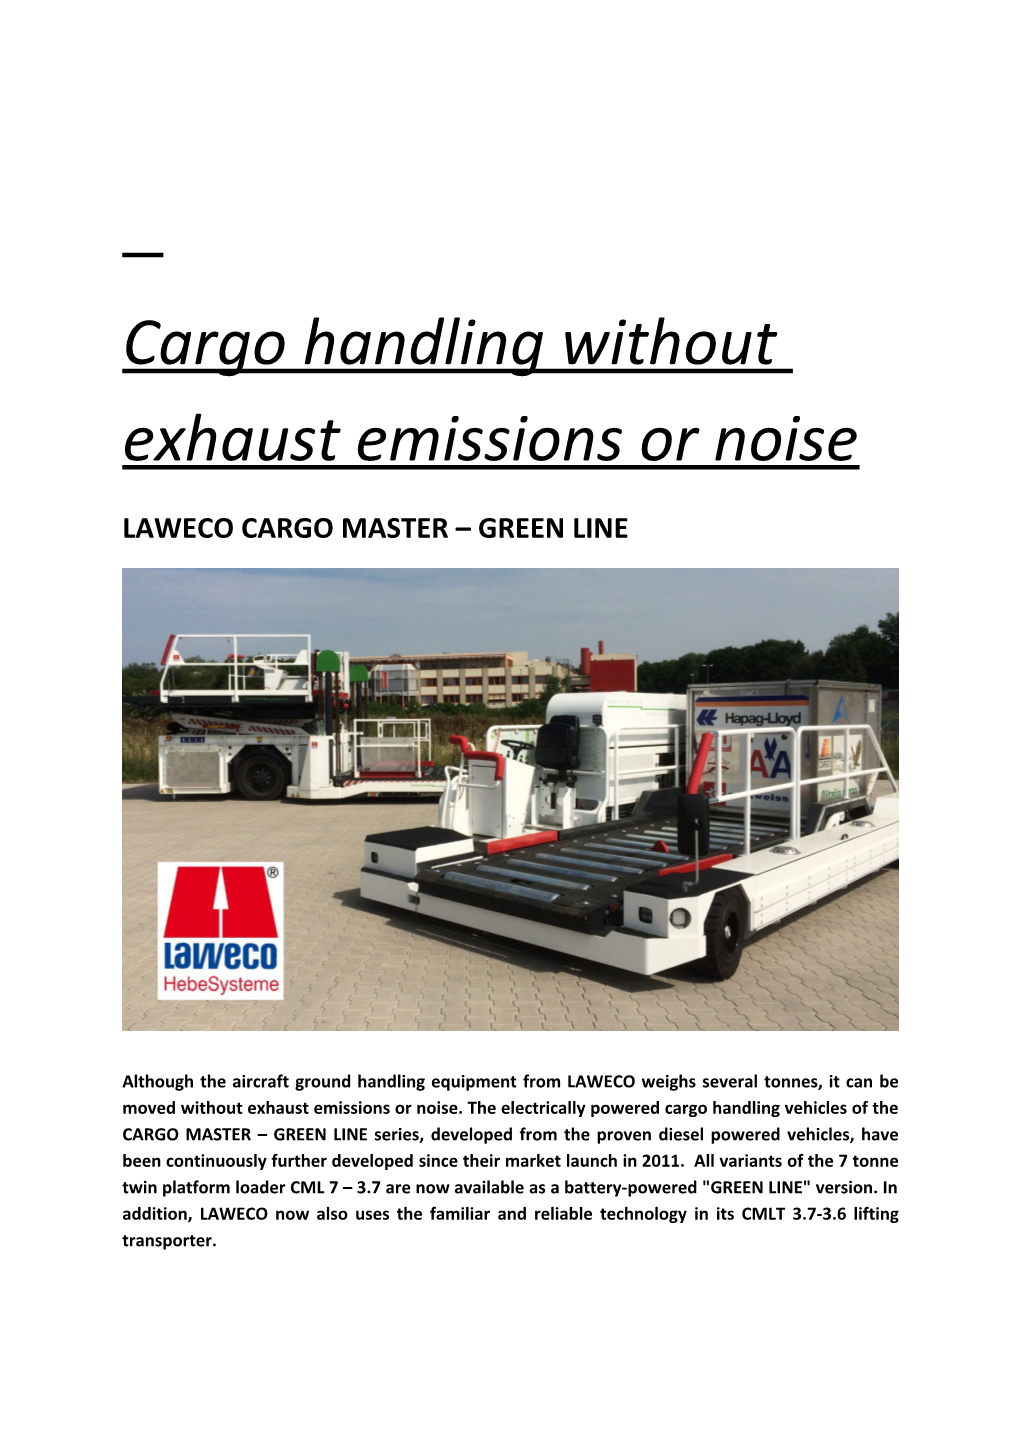 Cargo Handling Without Exhaust Emissions Or Noise